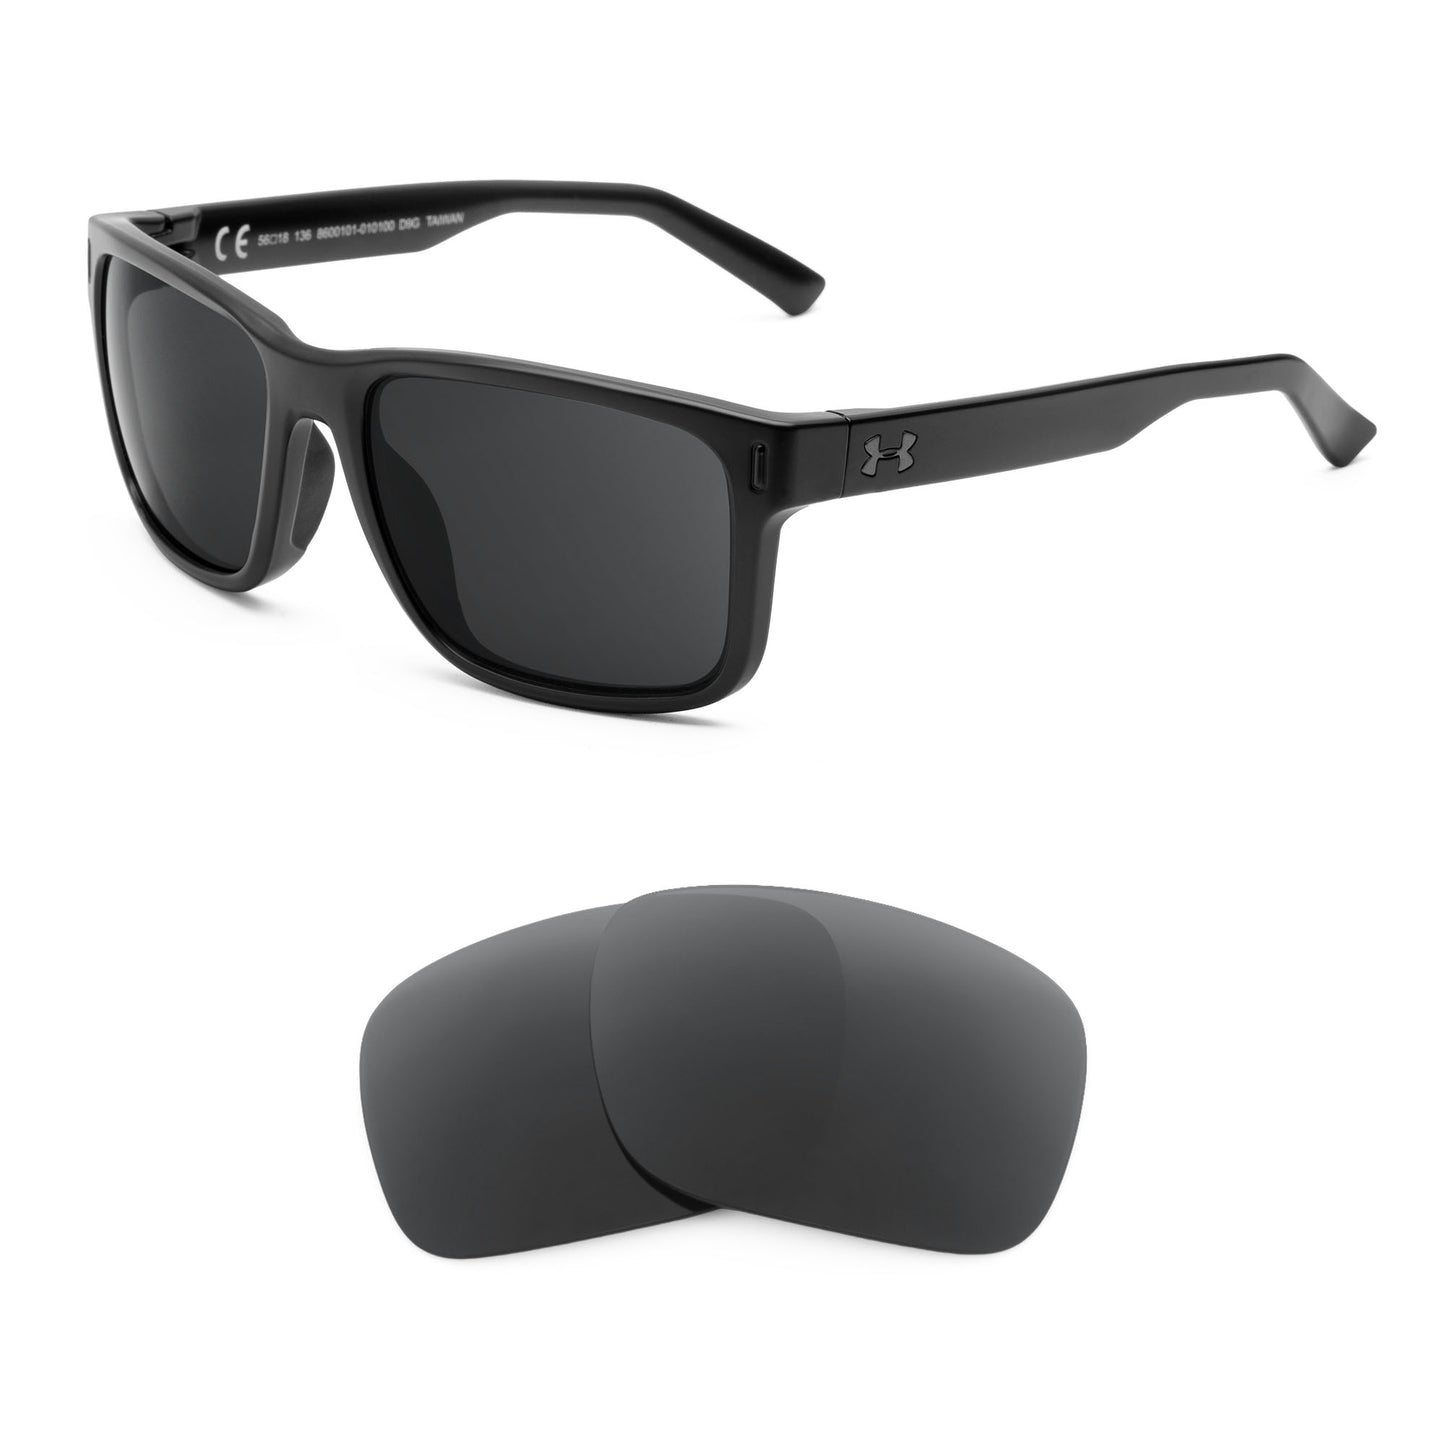 Under Armour Assist sunglasses with replacement lenses